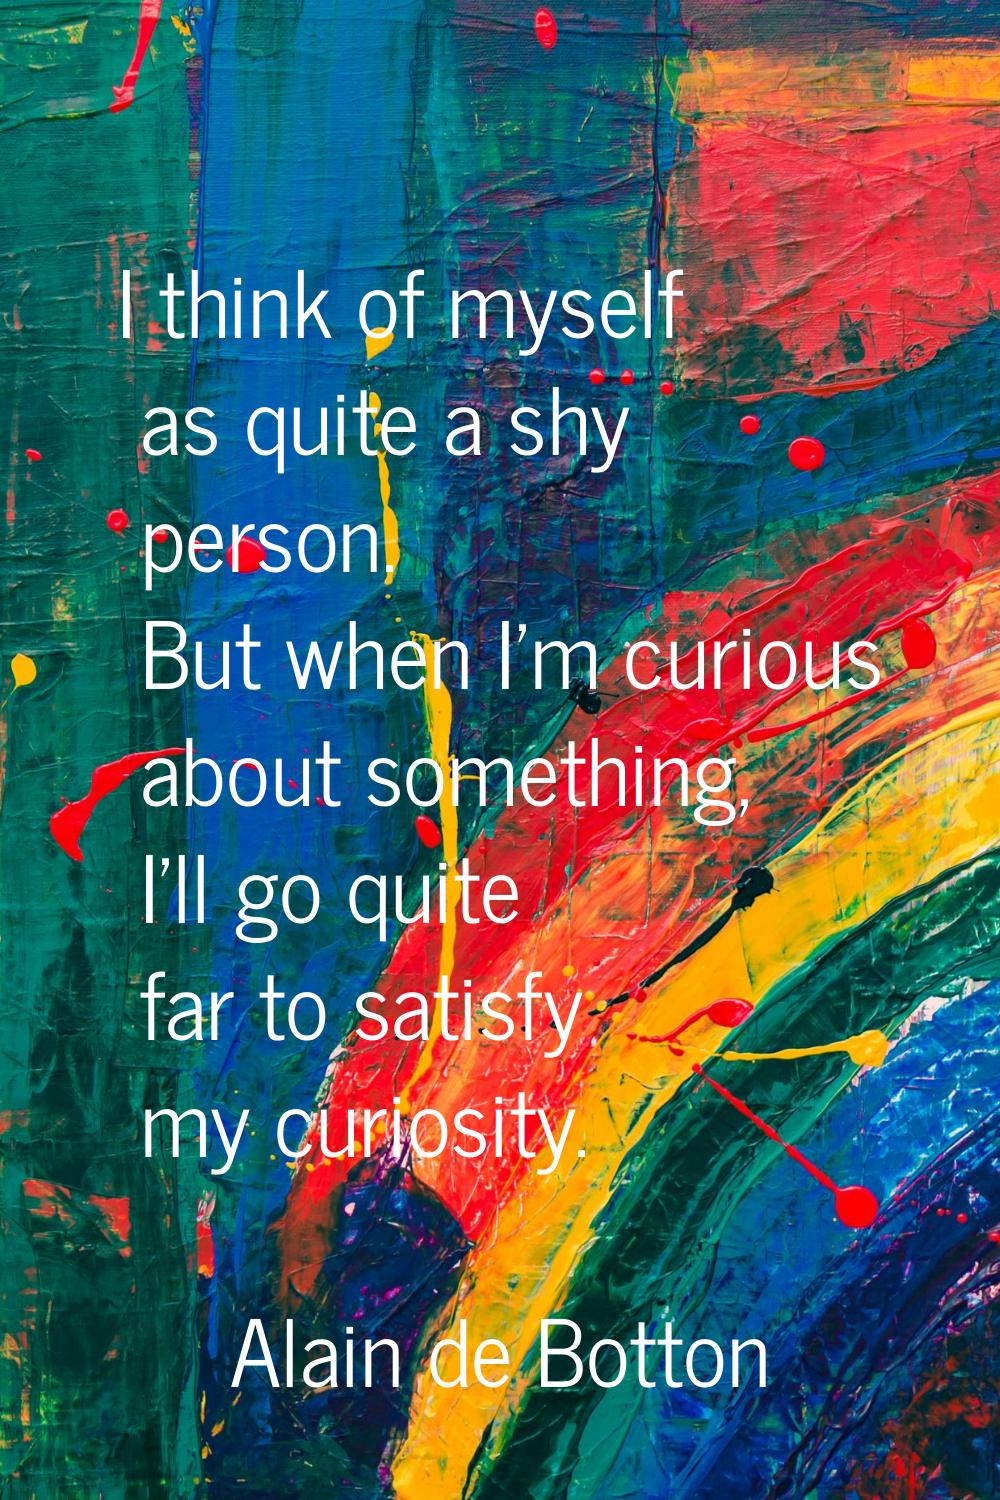 I think of myself as quite a shy person. But when I'm curious about something, I'll go quite far to